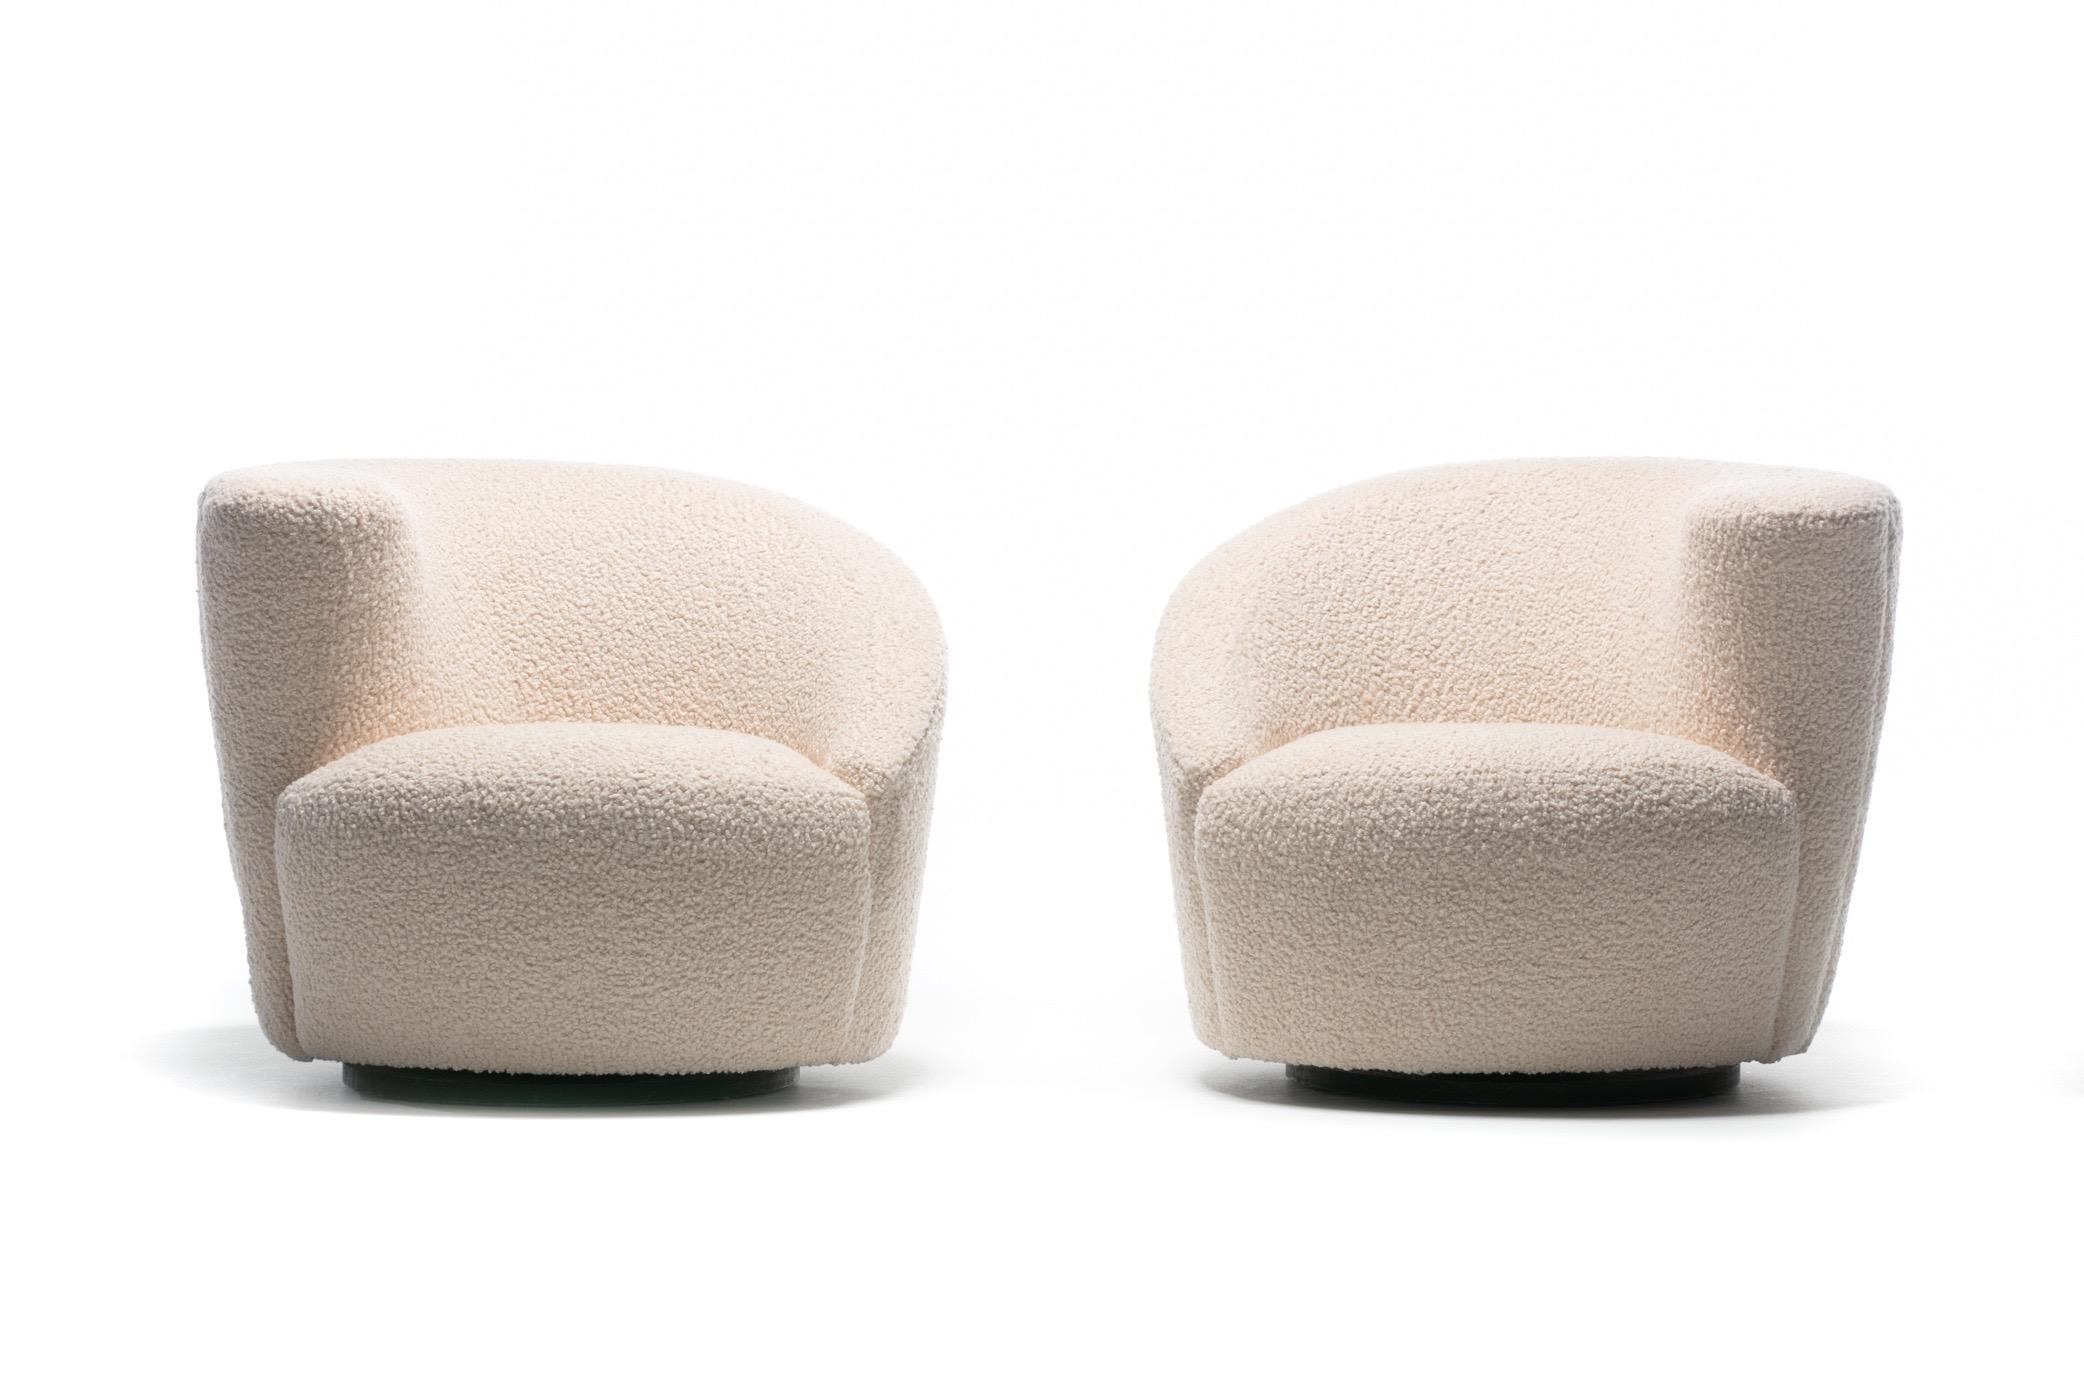 Amongst the most popular Vladimir Kagan designs, these Nautilus swivel lounge chairs are sculptural, comfortable and fun, and were recently professionally reupholstered in cozy Ivory Boucle. Corkscrew shape with sloped back and arm. The Nautilus